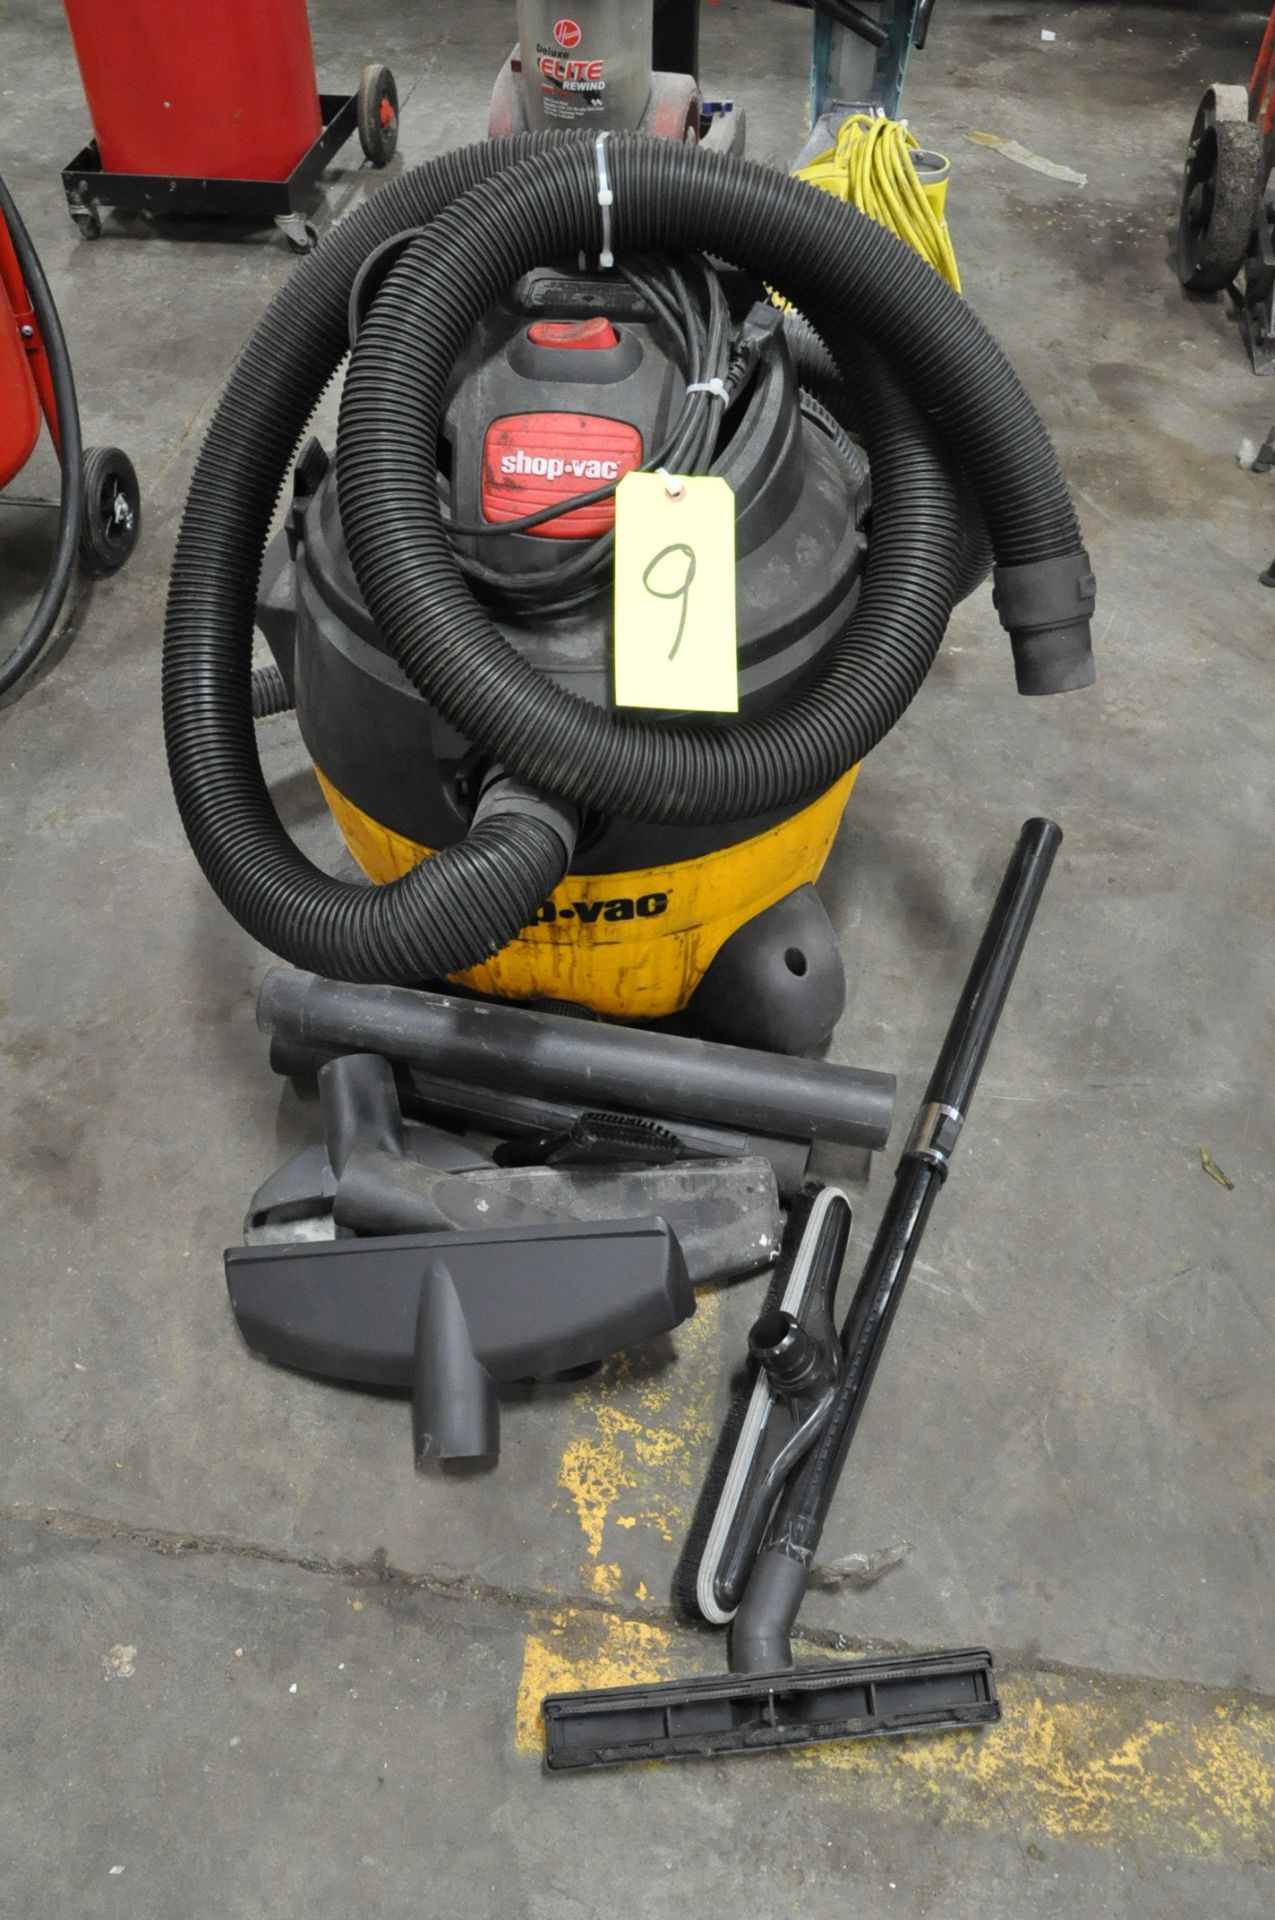 Shop Vac Brand Portable Shop Vacuum with Hose and Attachments